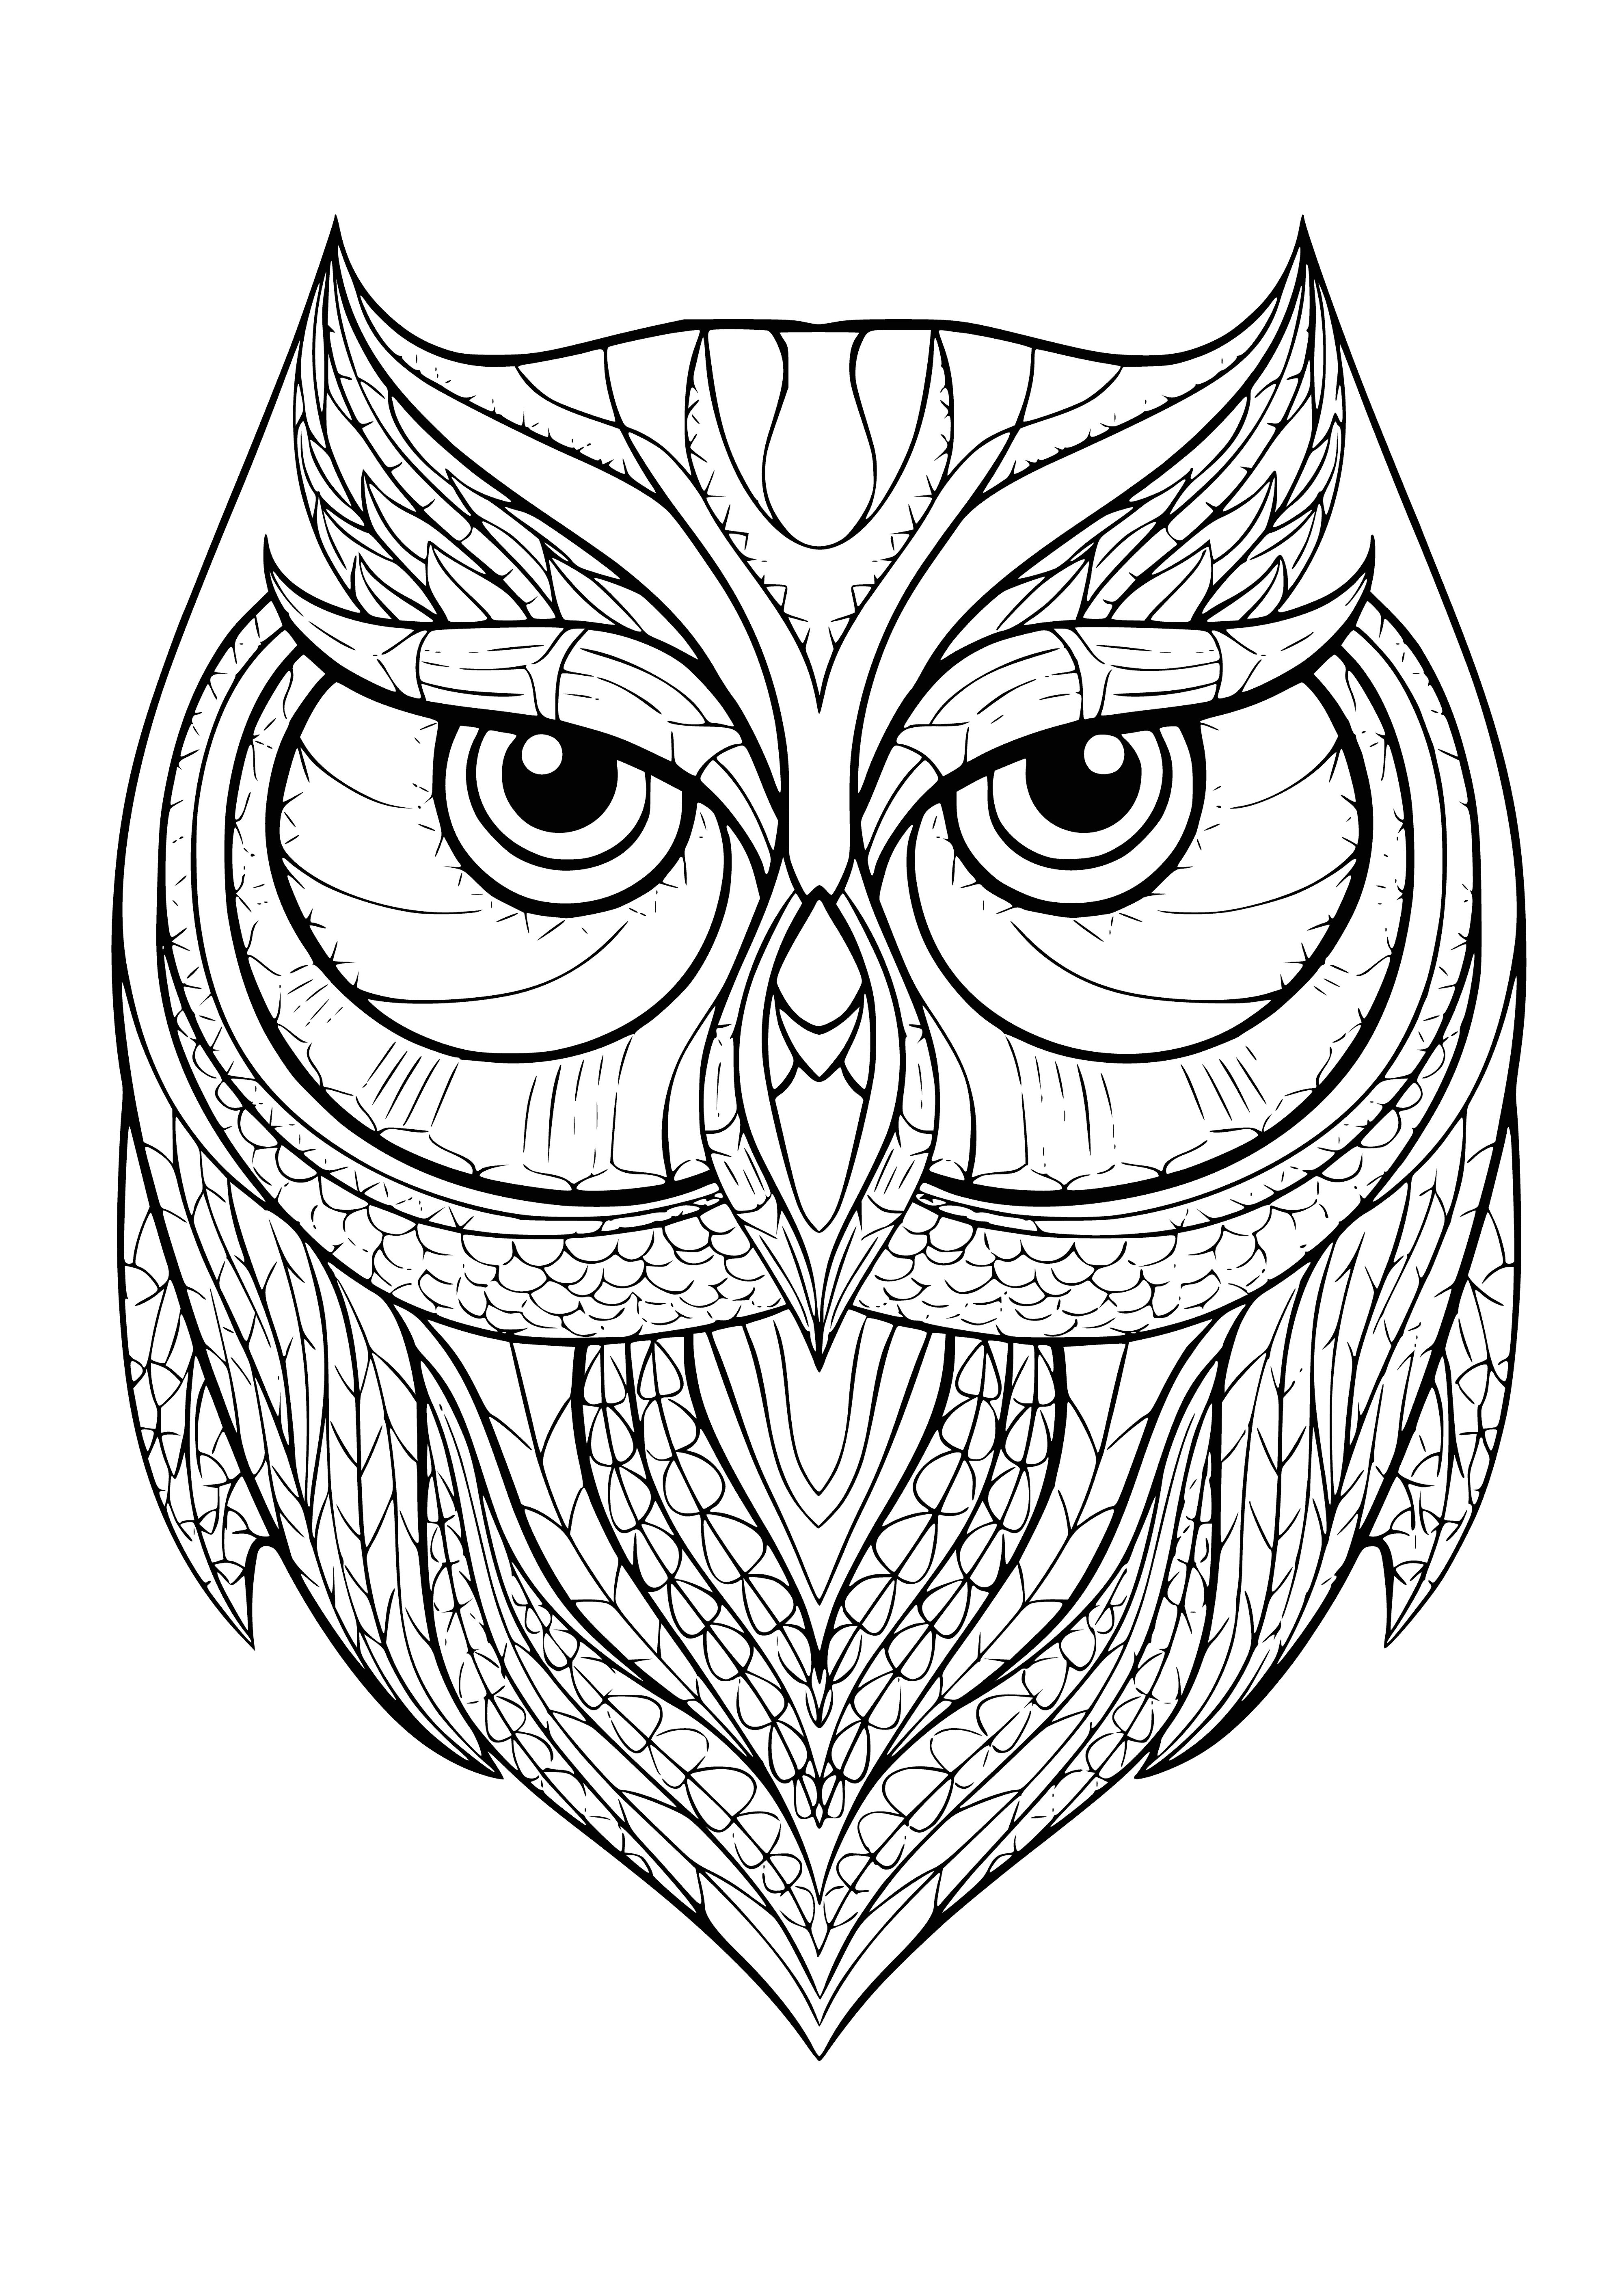 coloring page: A wise owl with fluffy feathers sits in a relaxing background of blues, greens and purples. It looks out with bright eyes, wearing a wise expression.